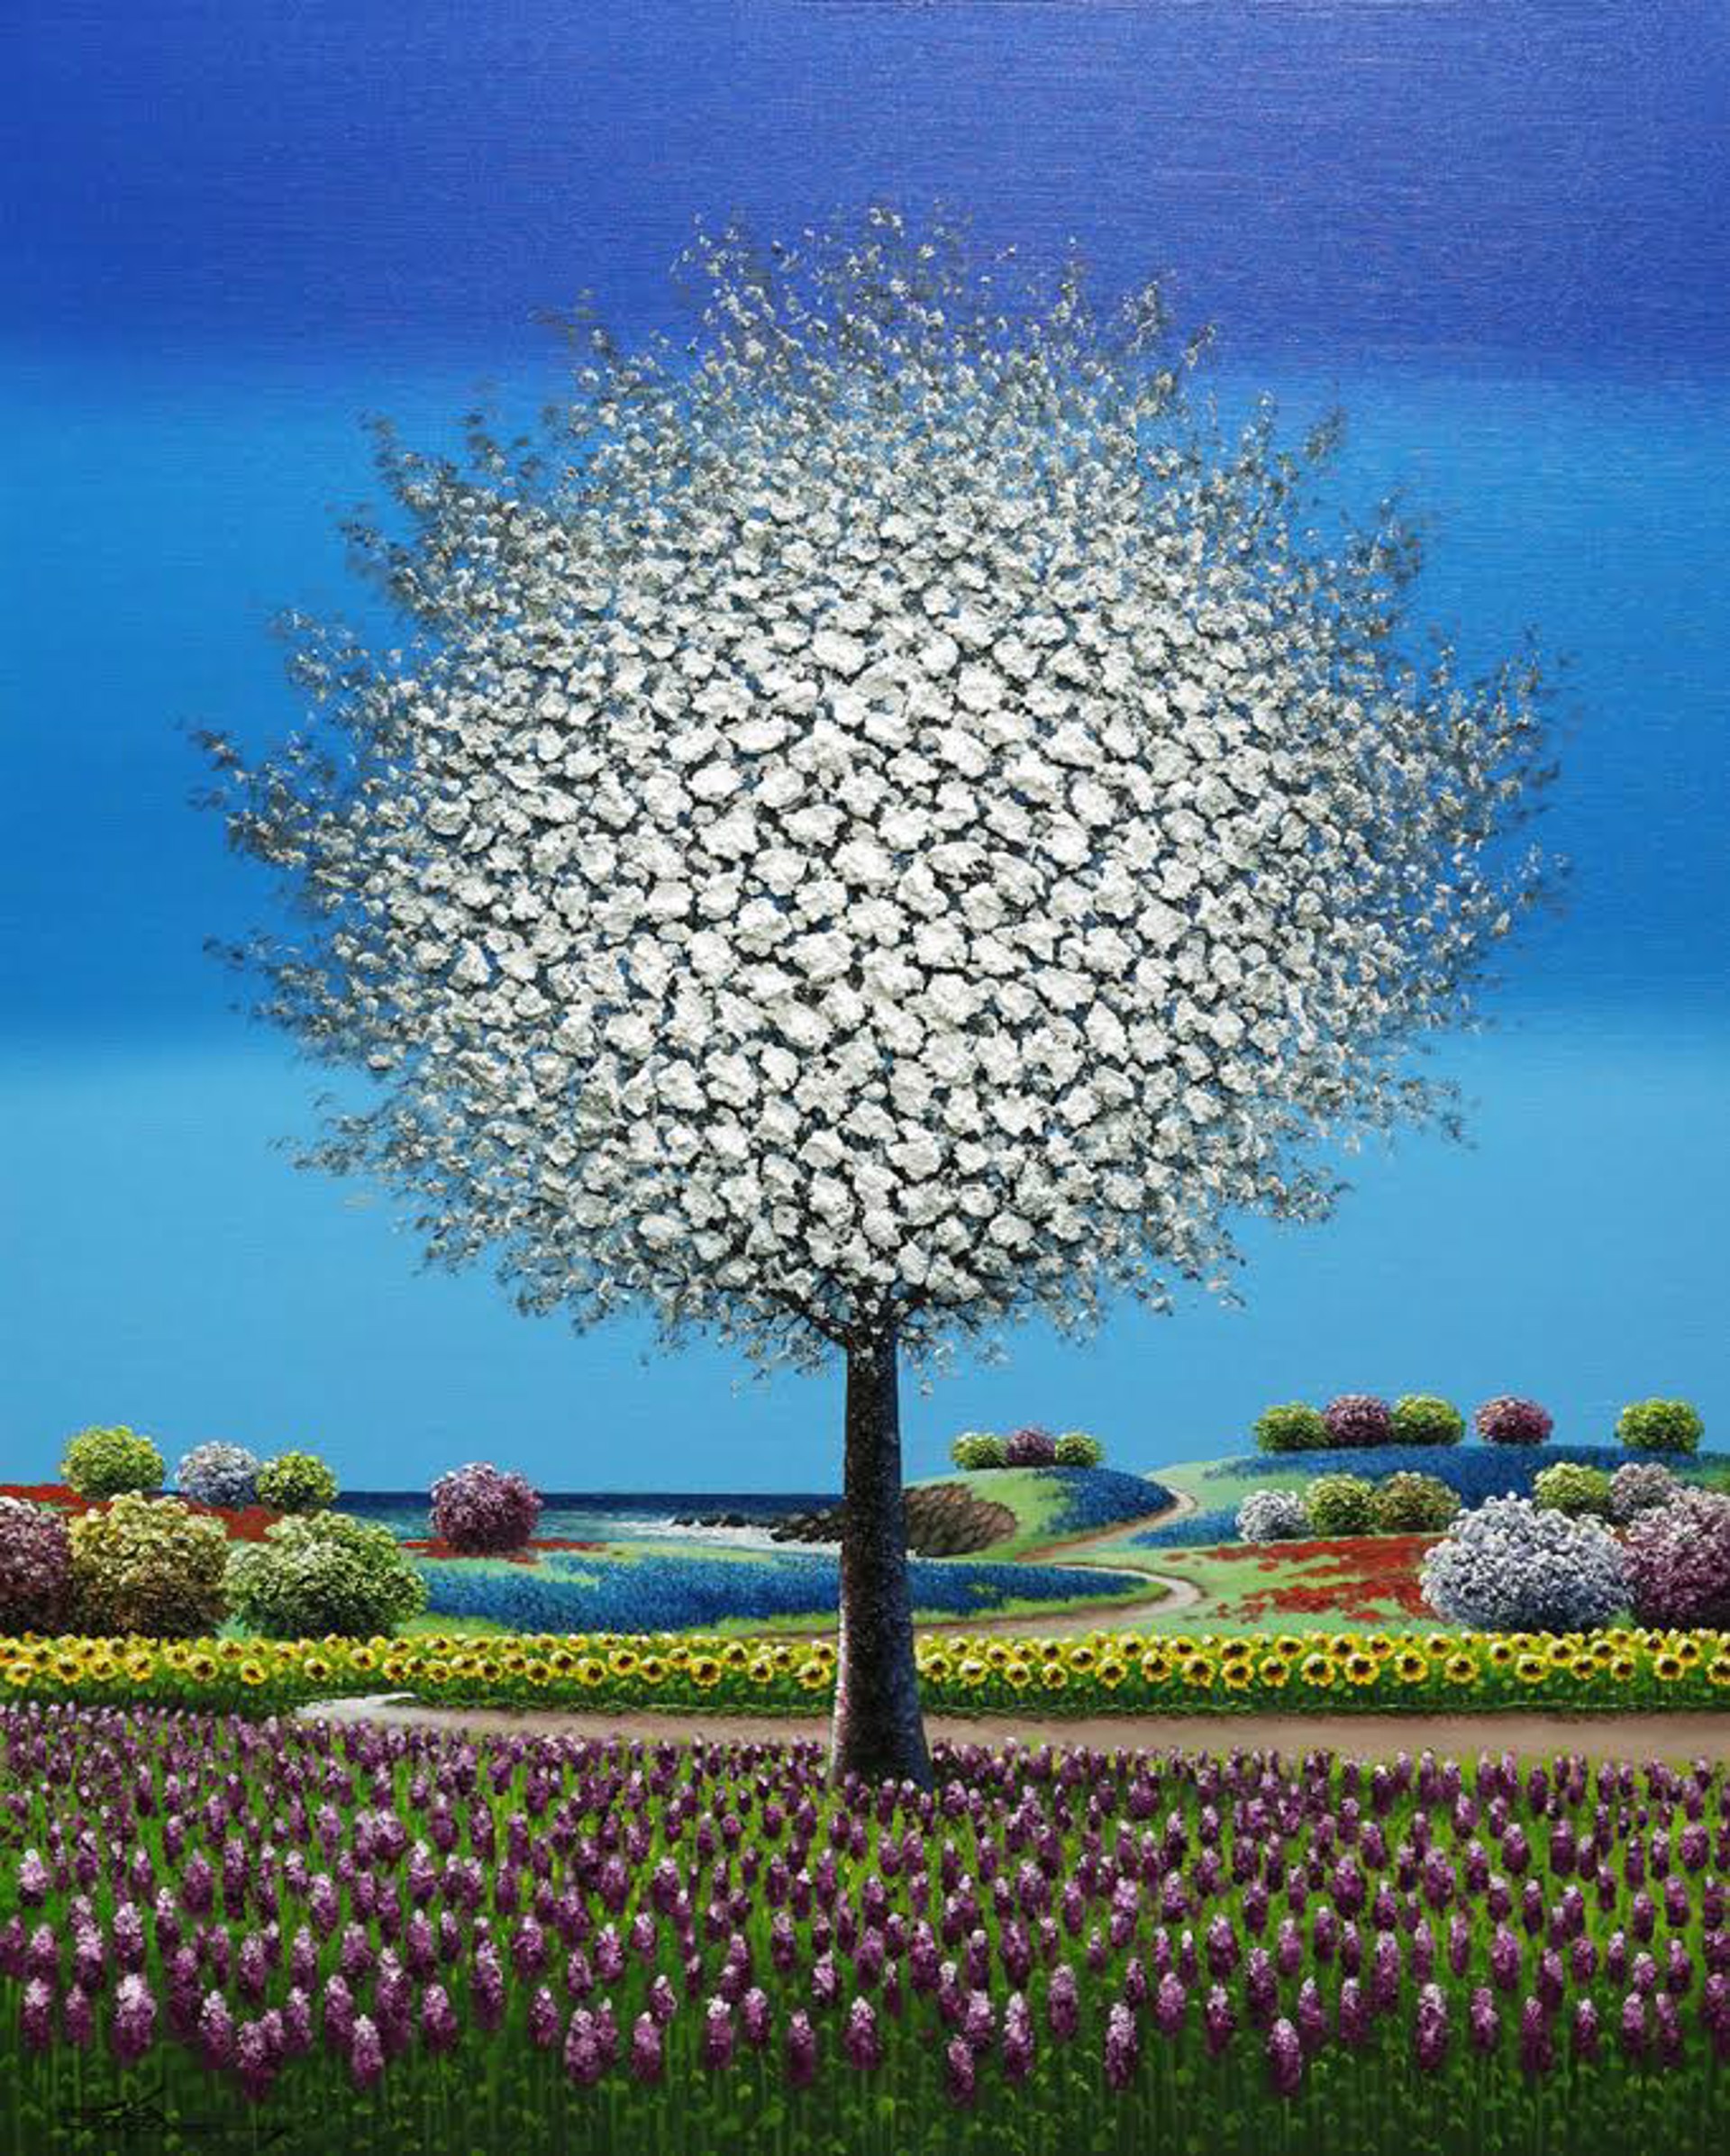 Ocean Blues by painter artist Mario Jung features a thickly textured white leaved tree in front of a ocean cove with purple flowers in the foreground